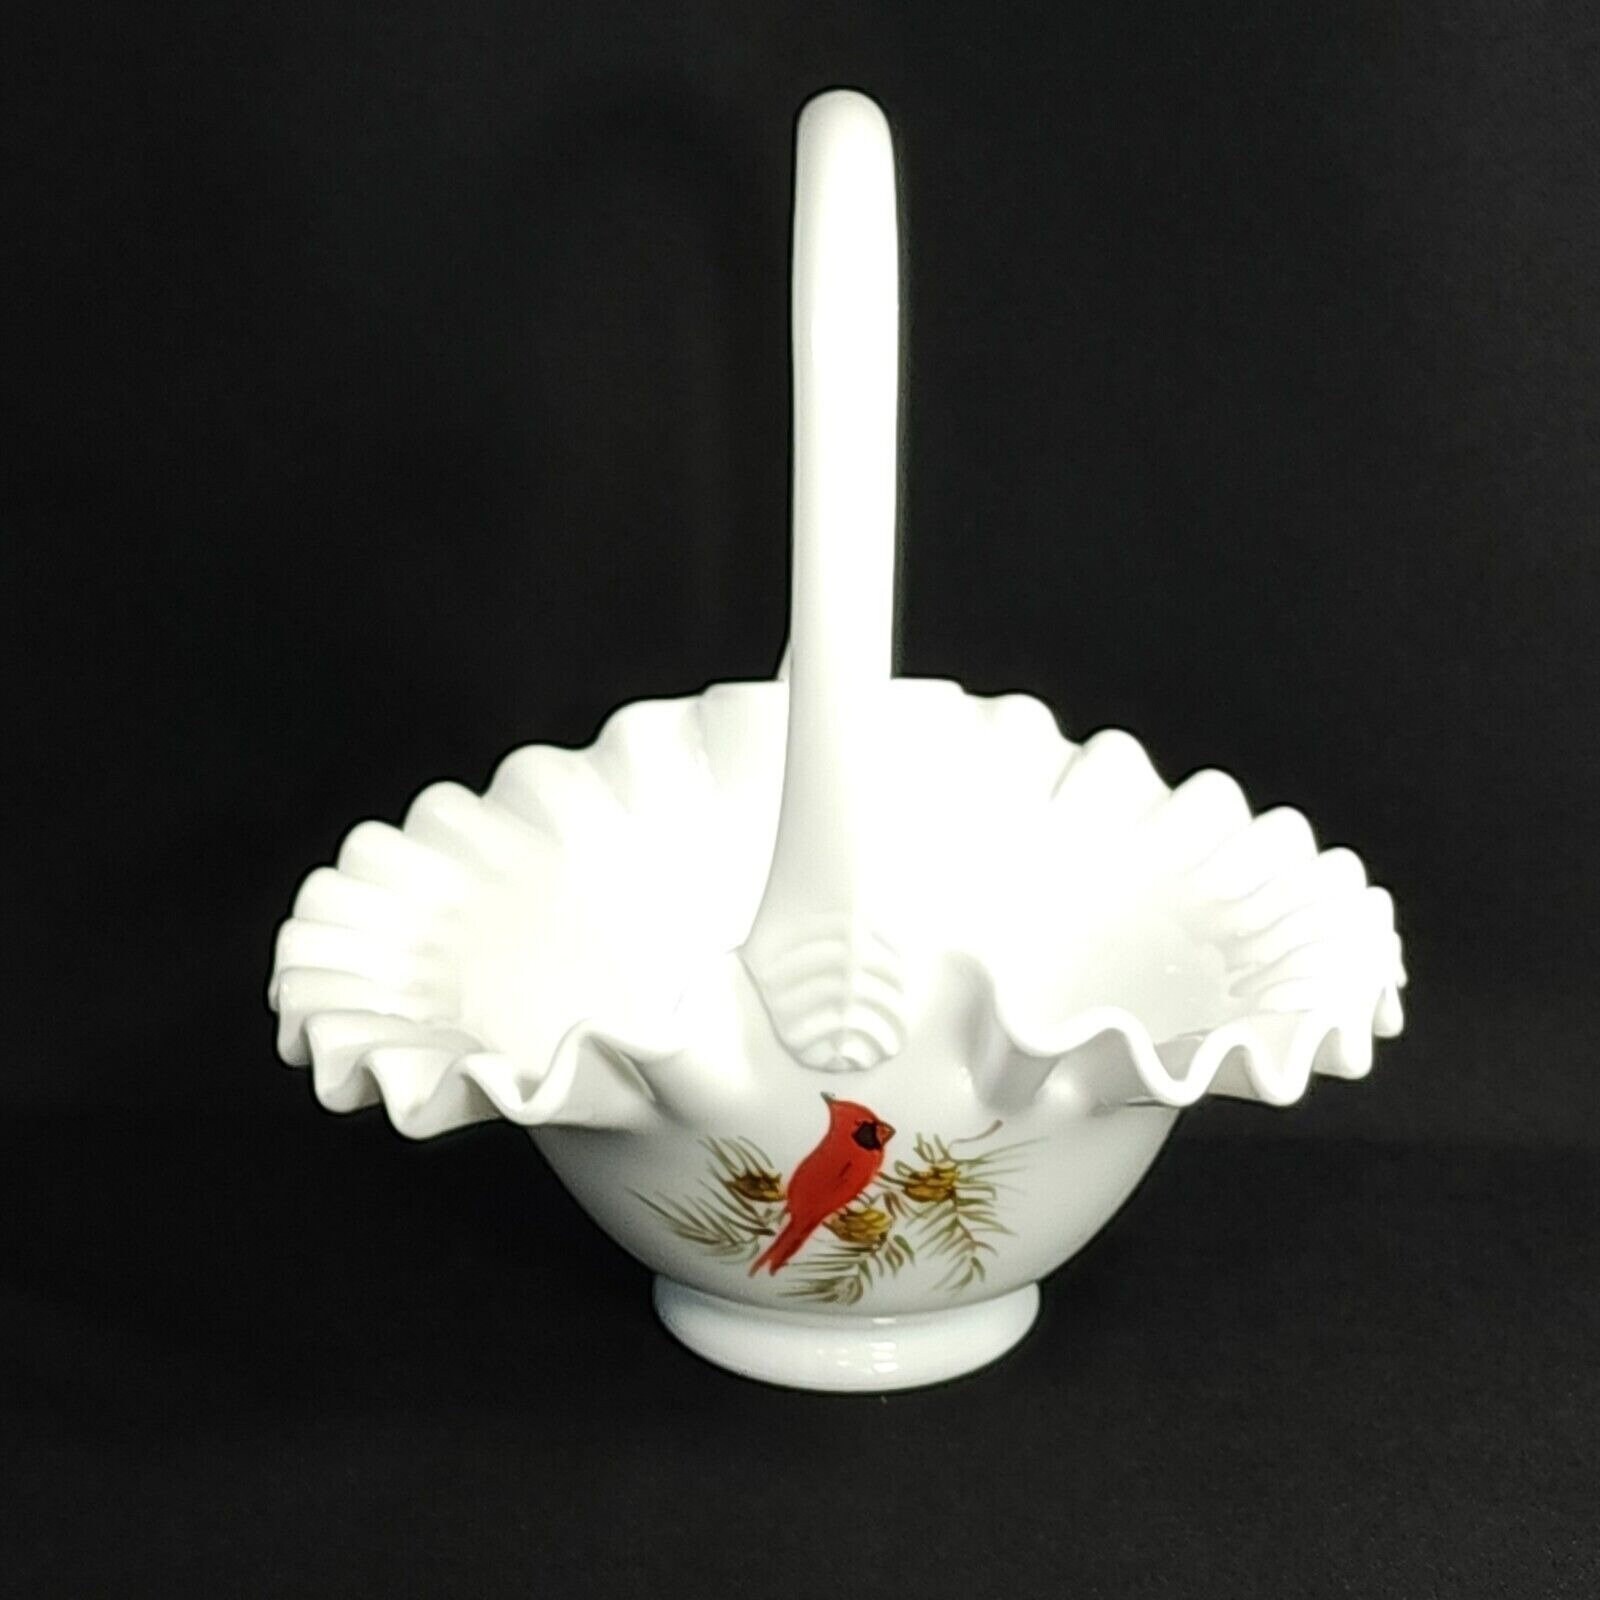 1982 Fenton cardinals plate, hand painted by